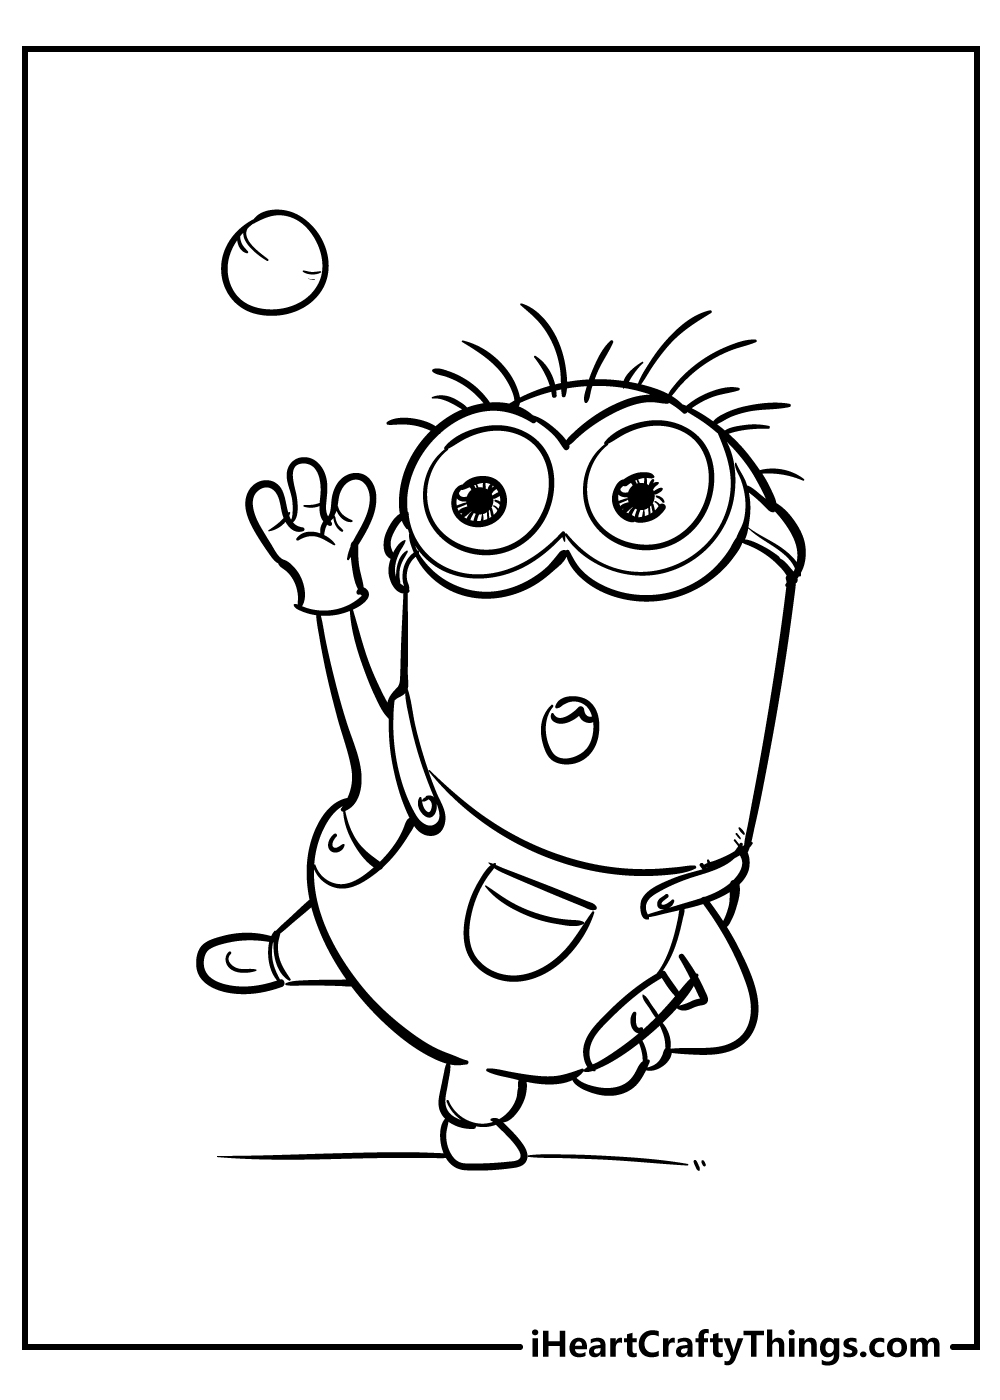 Minions Coloring Sheet for children free download